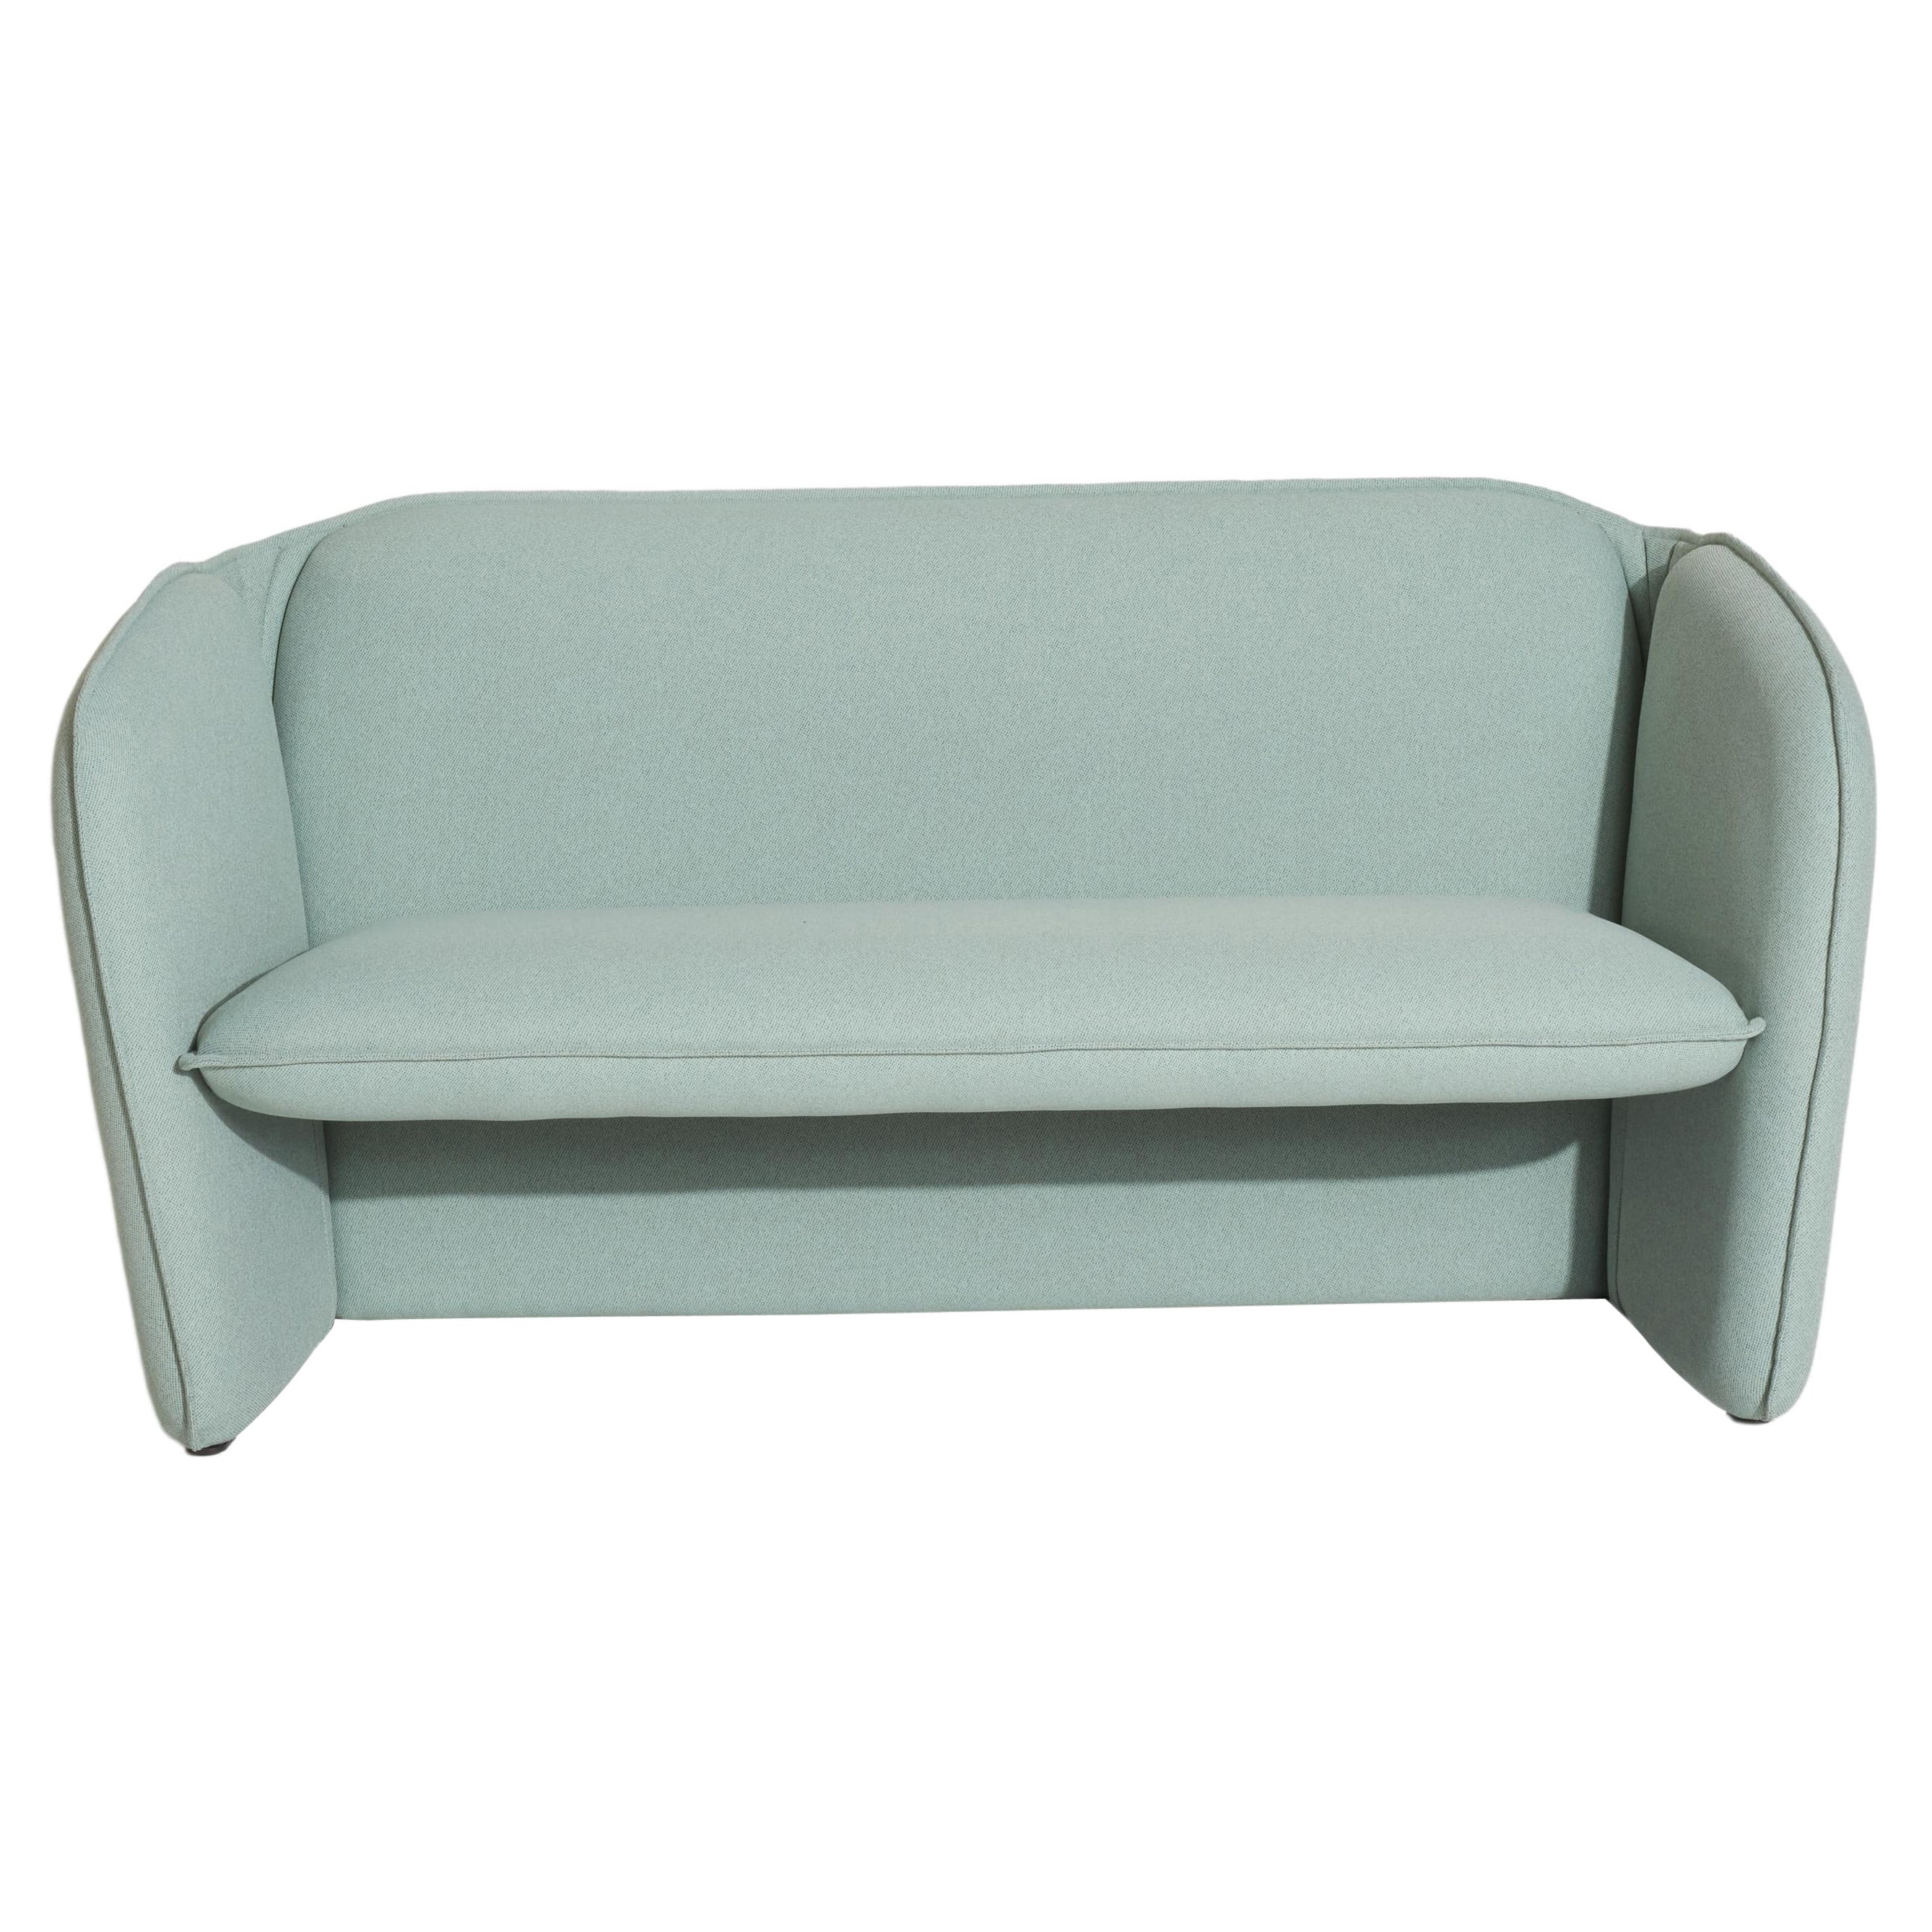 Petite Friture Lily Sofa in Light Blue by Färg & Blanche, 2022 For Sale